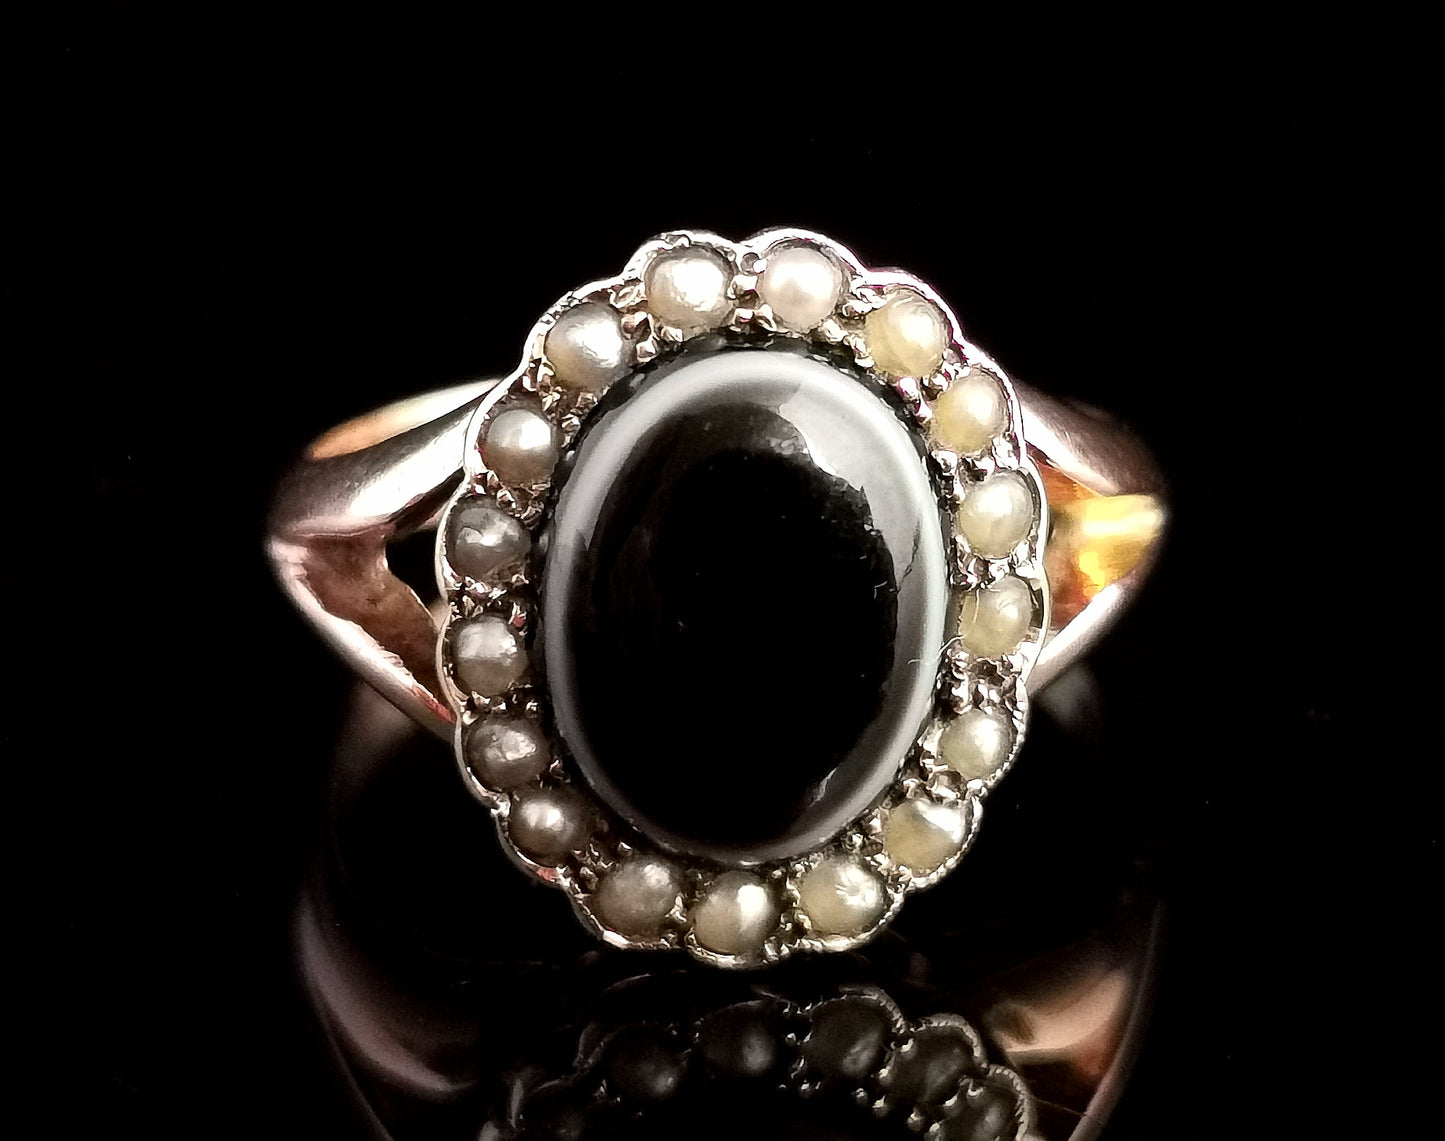 Antique mourning ring, Bullseye agate and seed pearl, 9ct gold